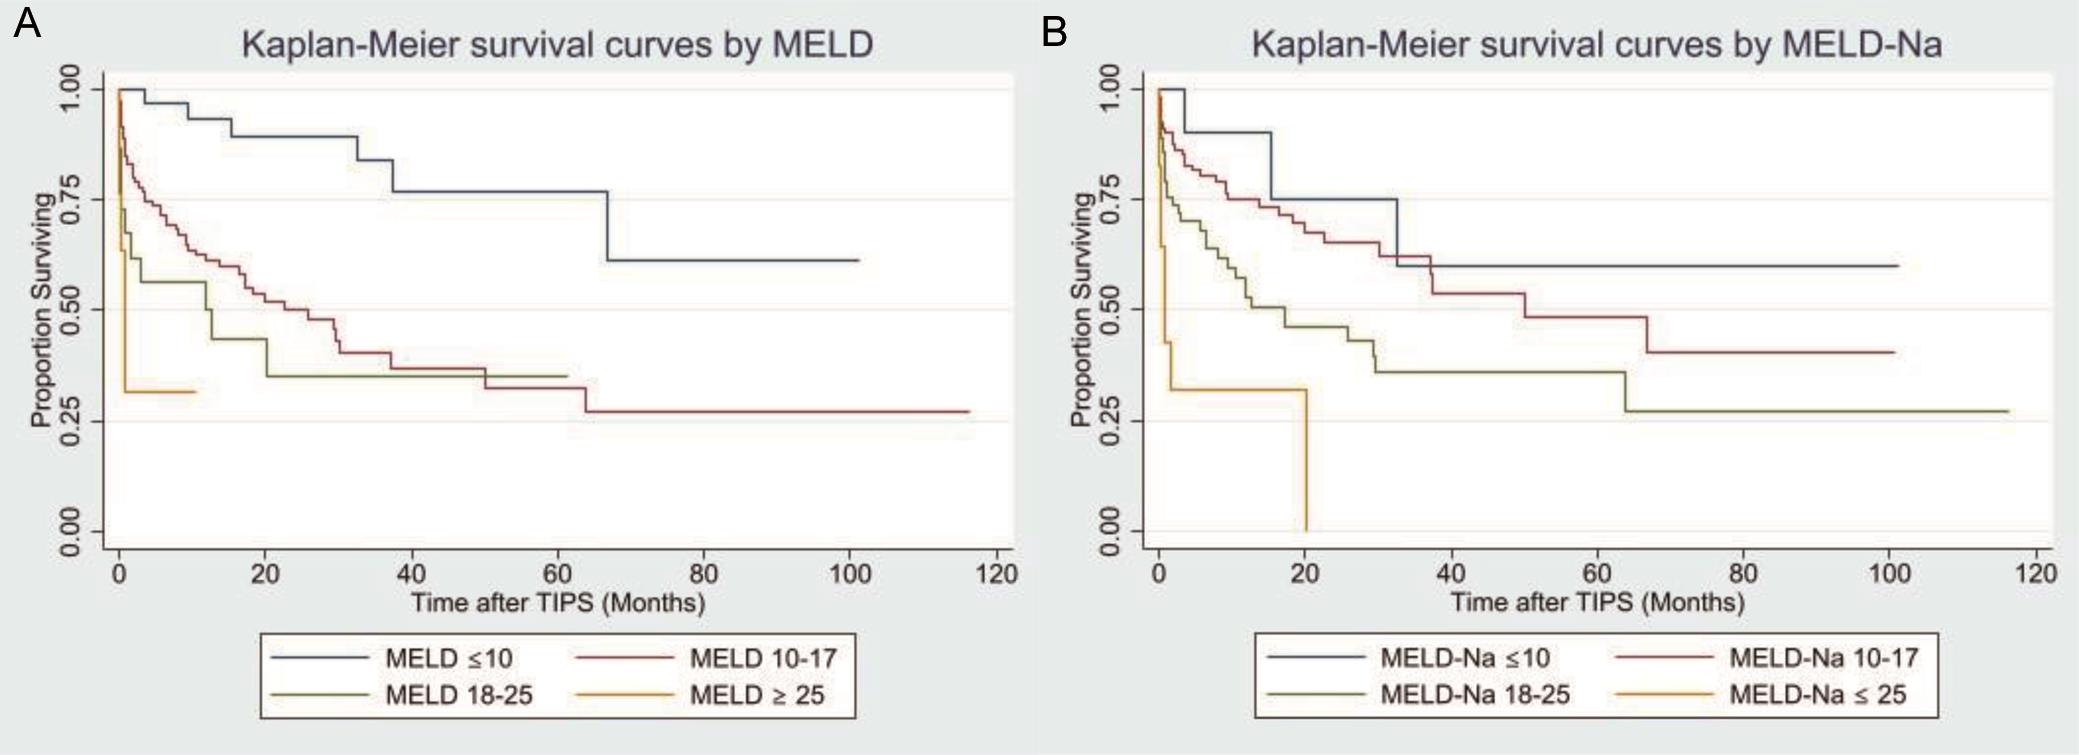 Kaplan-Meier survival curves based on MELD and MELD-Na scores by predetermined categories.